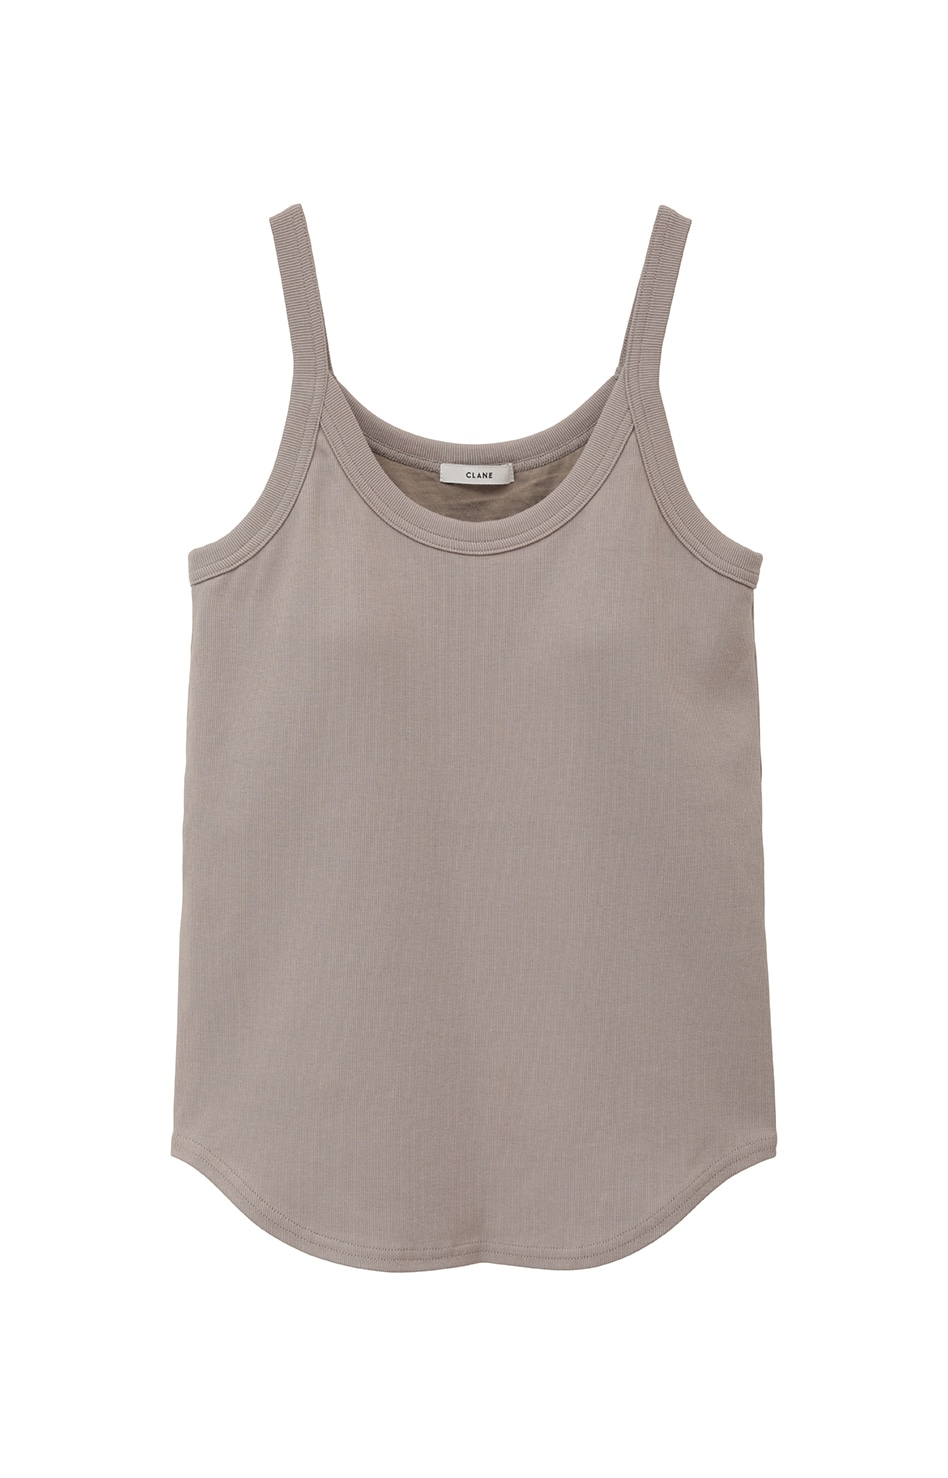 RIB CAMISOLE TANK TOPS｜TOPS(トップス)｜CLANE OFFICIAL ONLINE STORE